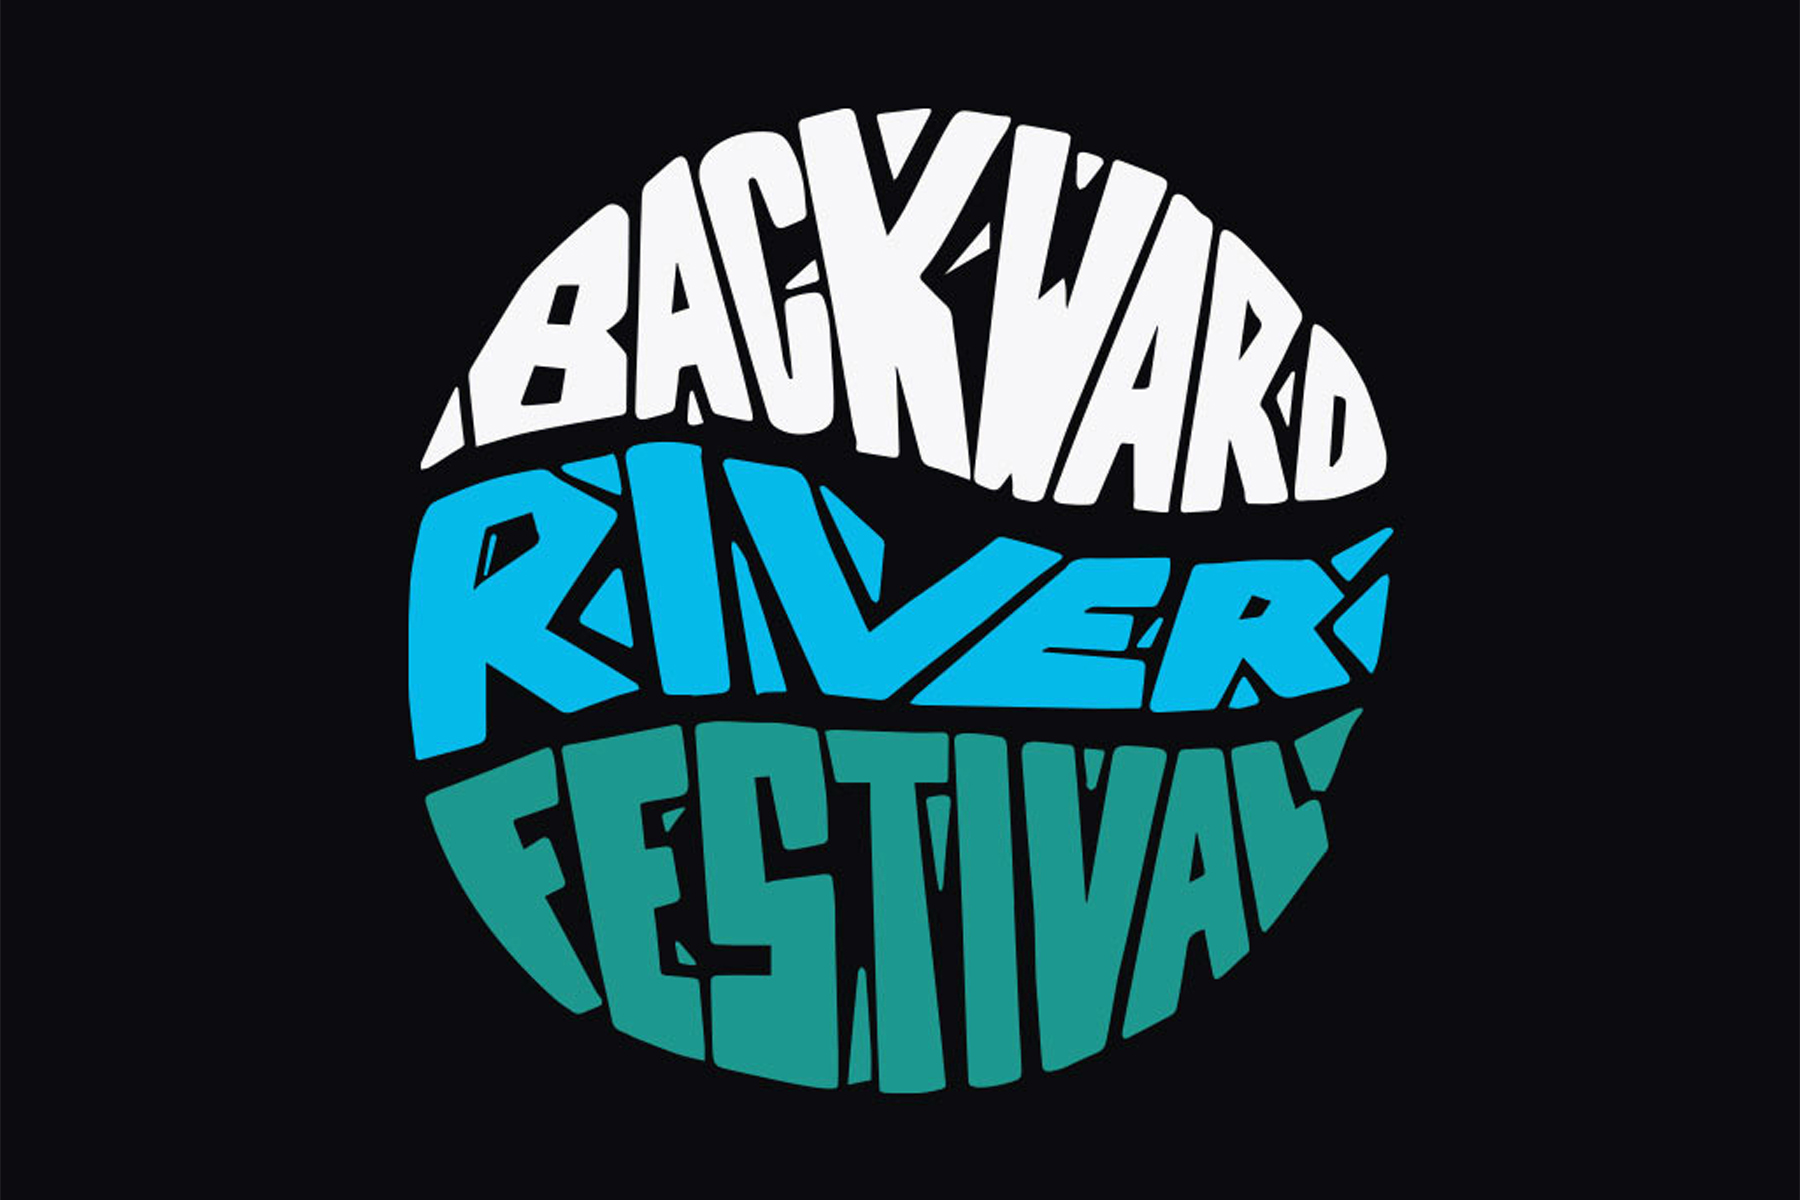 The Backward River Festival | UIC today